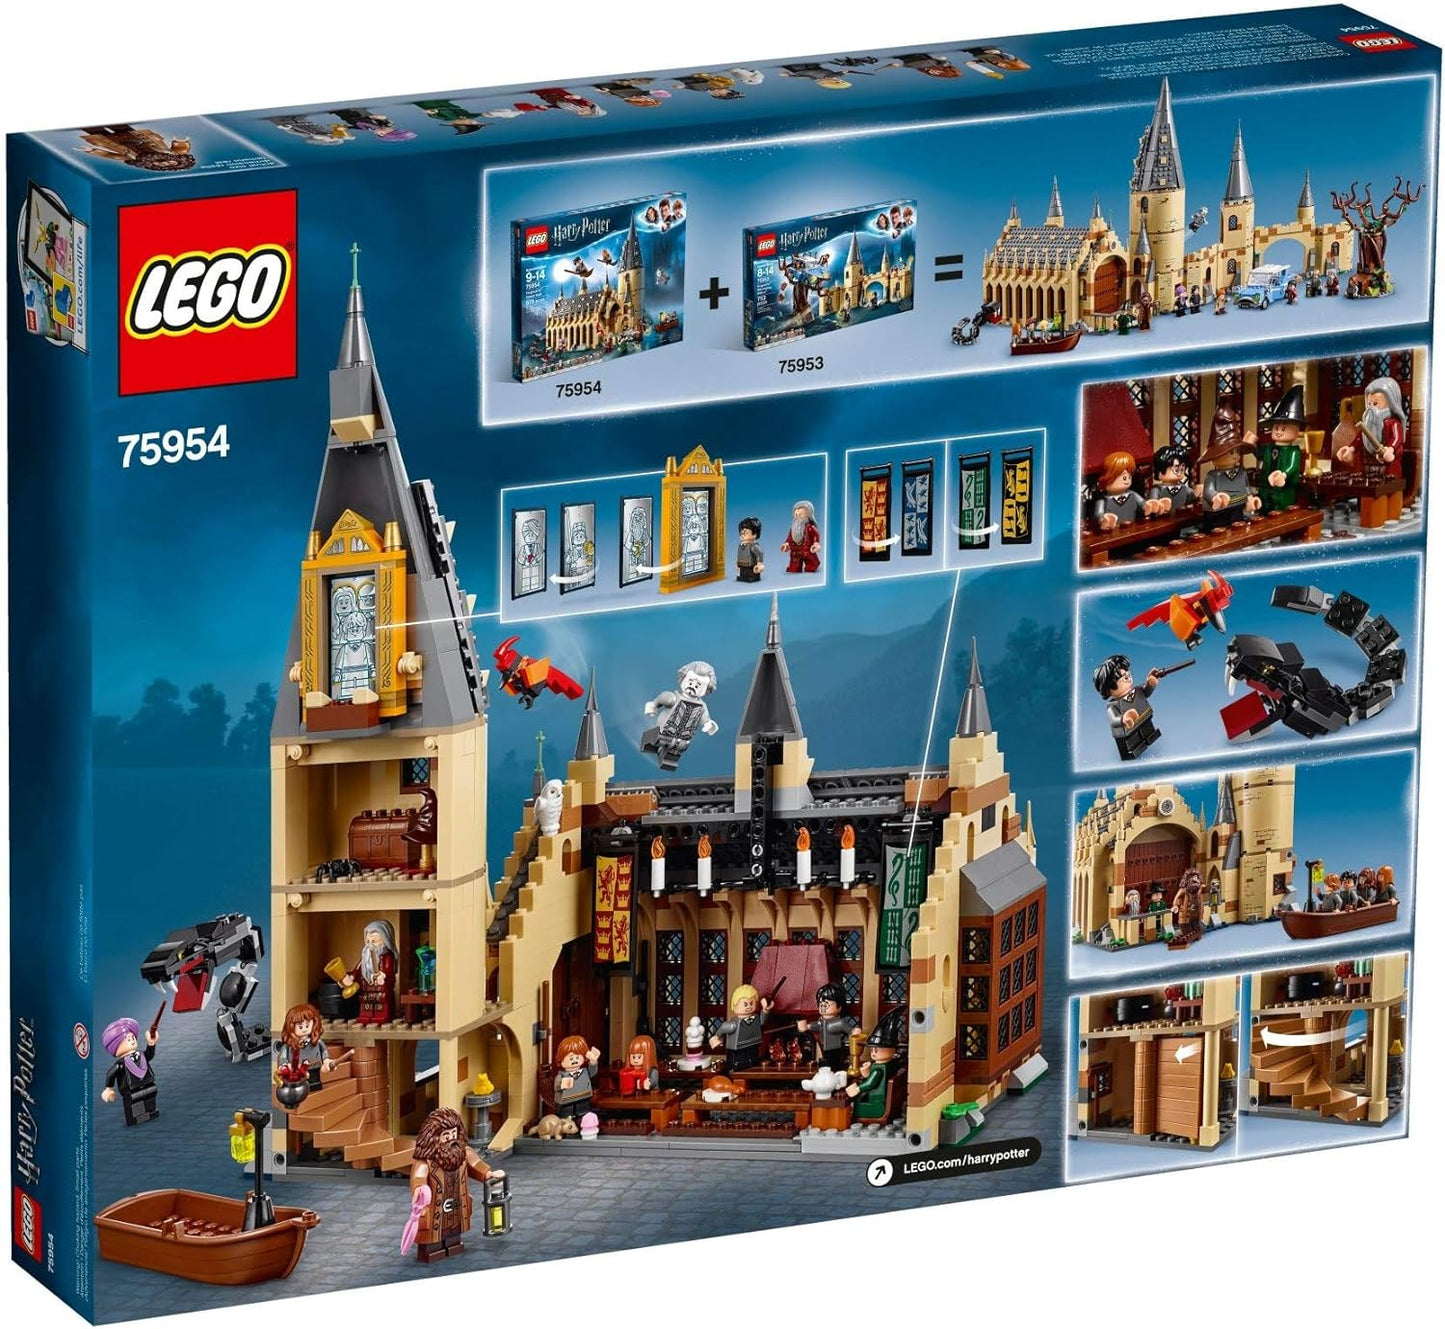 Lego 75954 Harry Potter Hogwarts Great Hall Toy, Wizzarding World Fan Gift, Building Sets for Kids